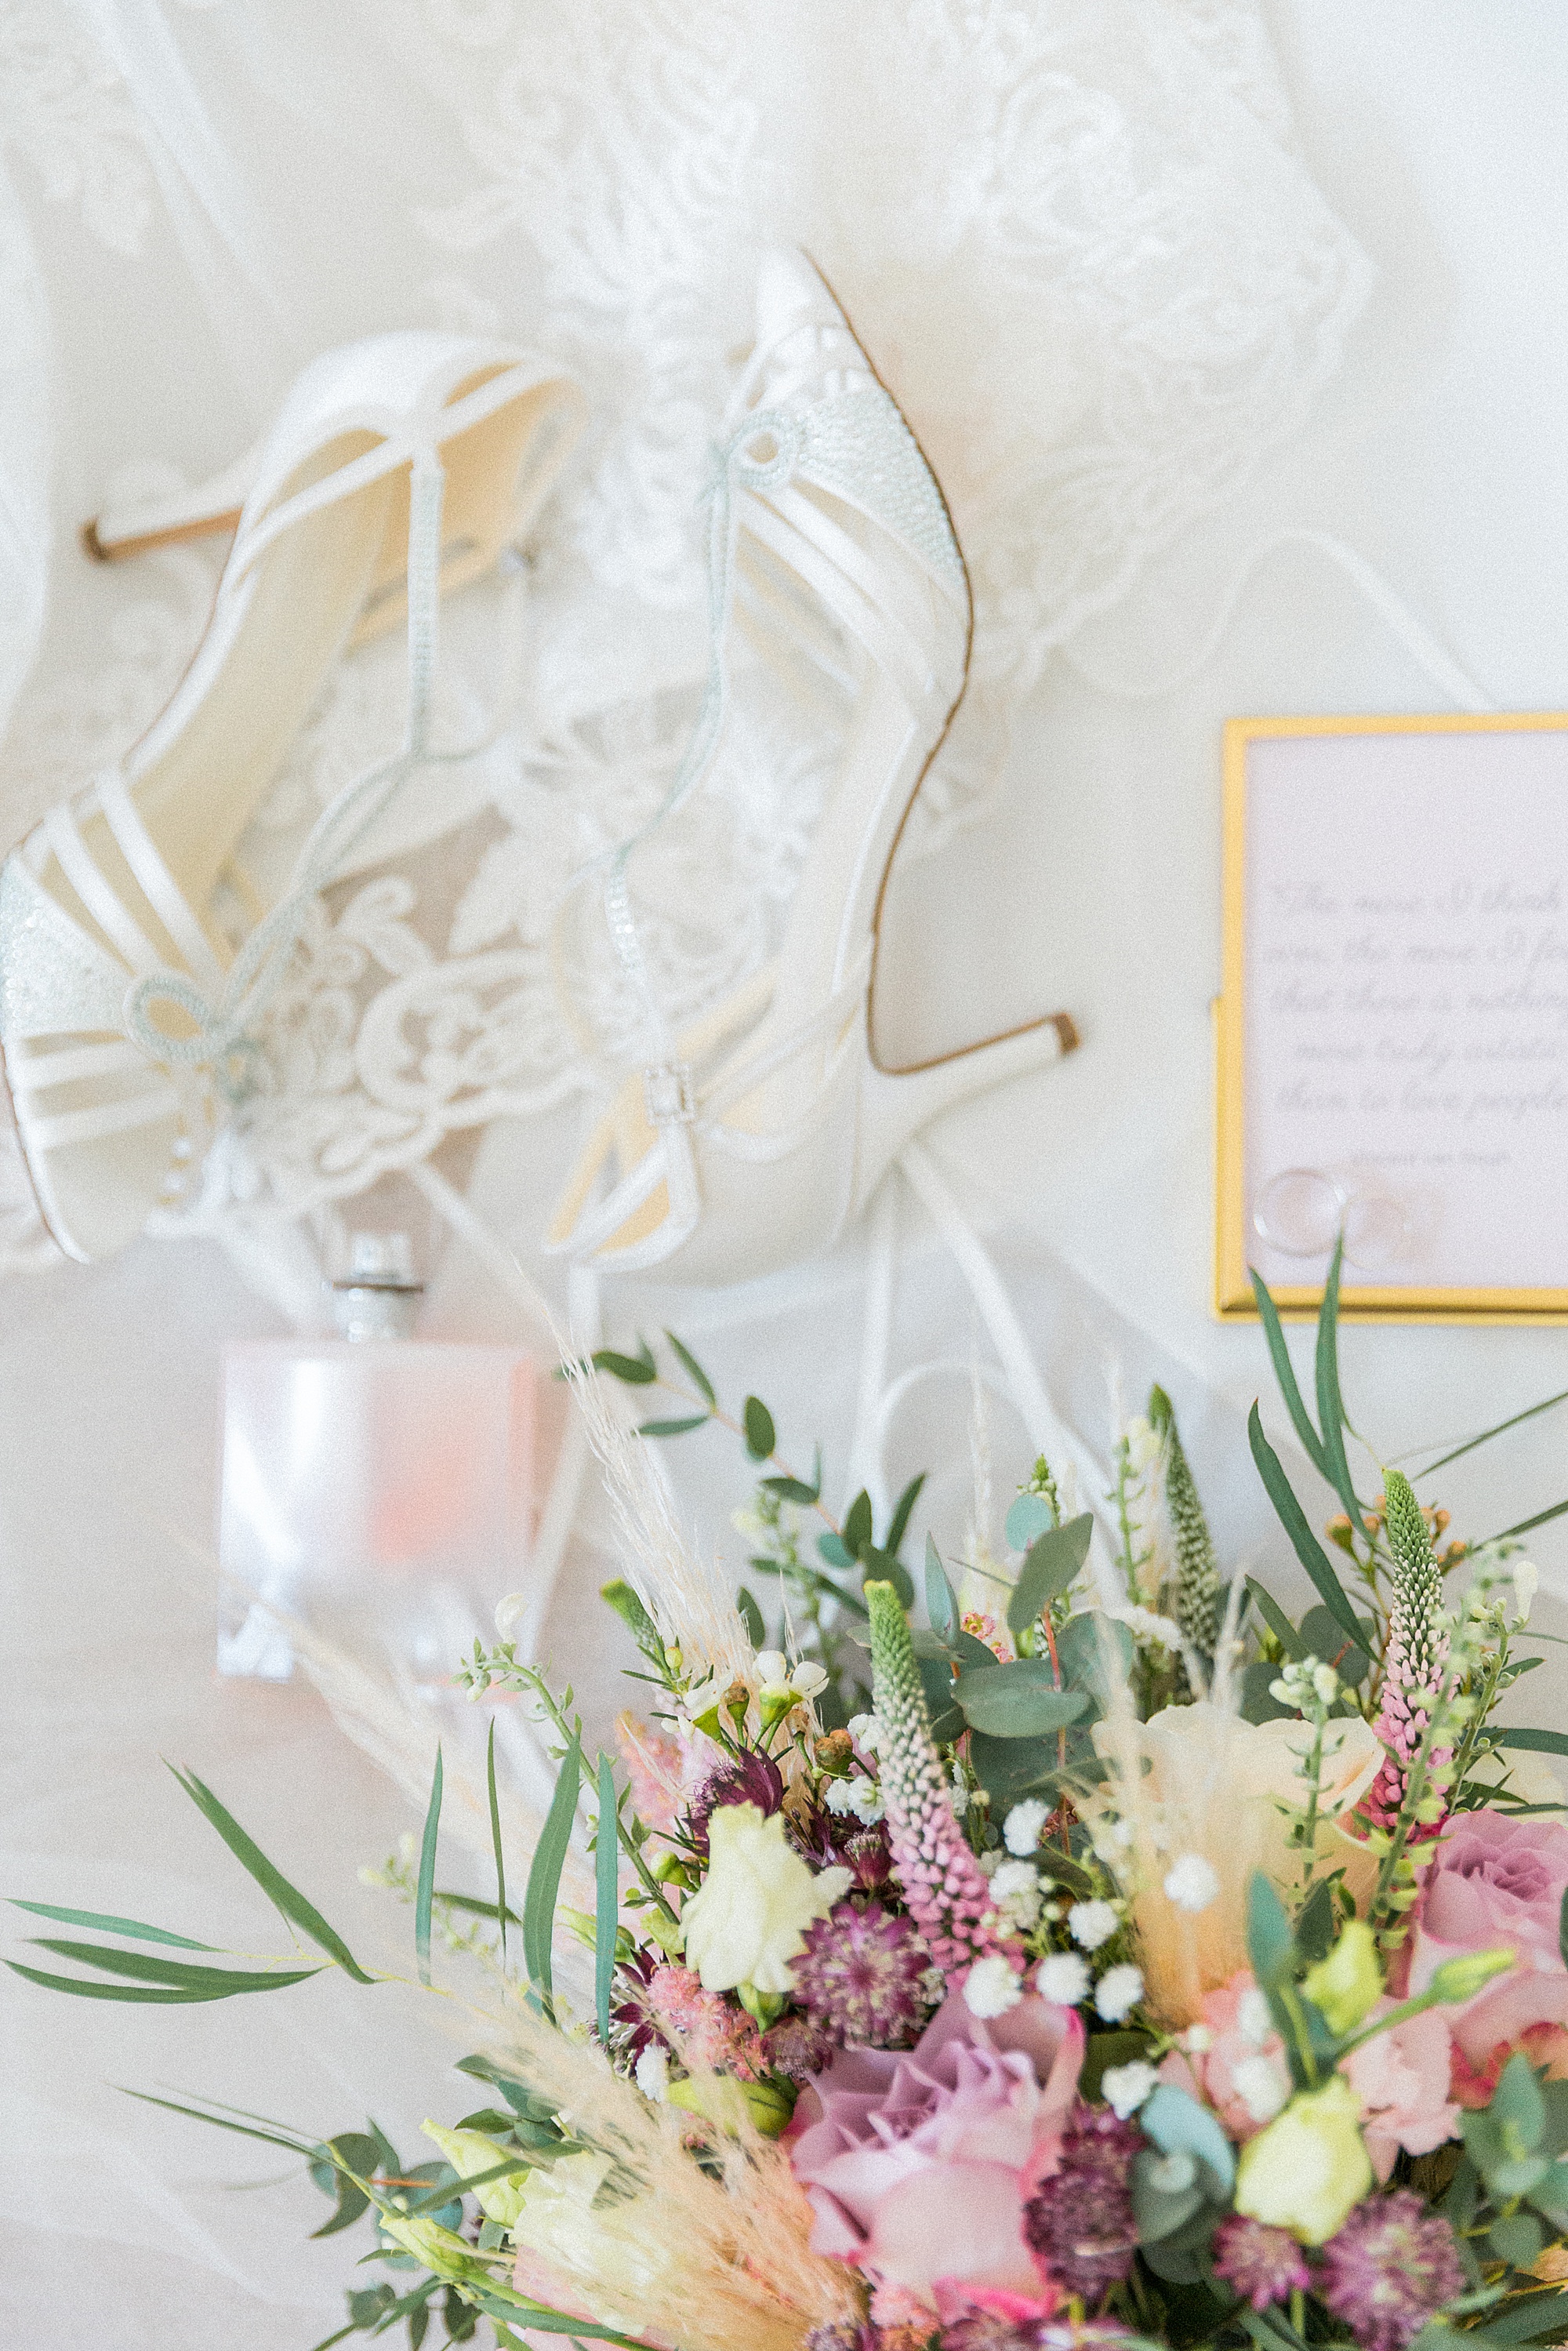 image shows the bride's wedding details like her shoes, flowers, jewellery etc posed and placed in an arrangement on the morning of her wedding against her dress and veil